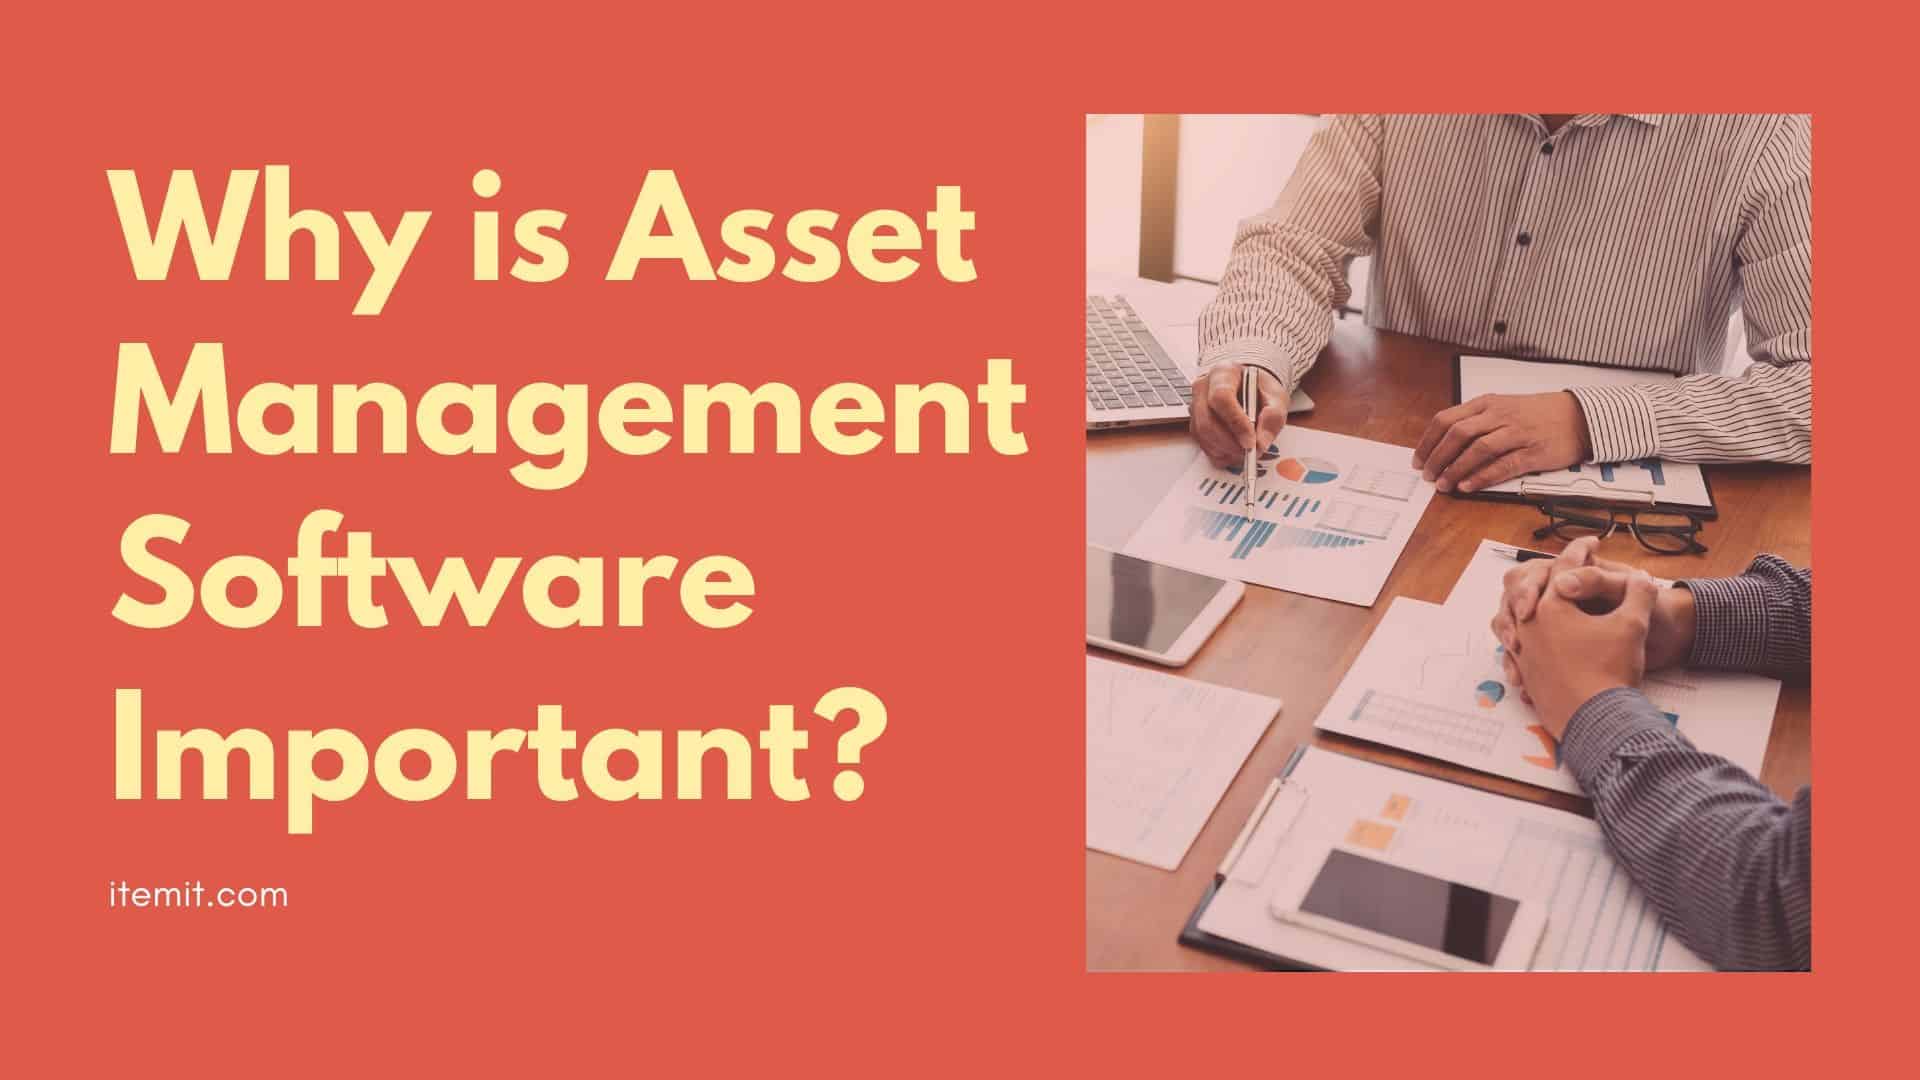 why is asset management software important?